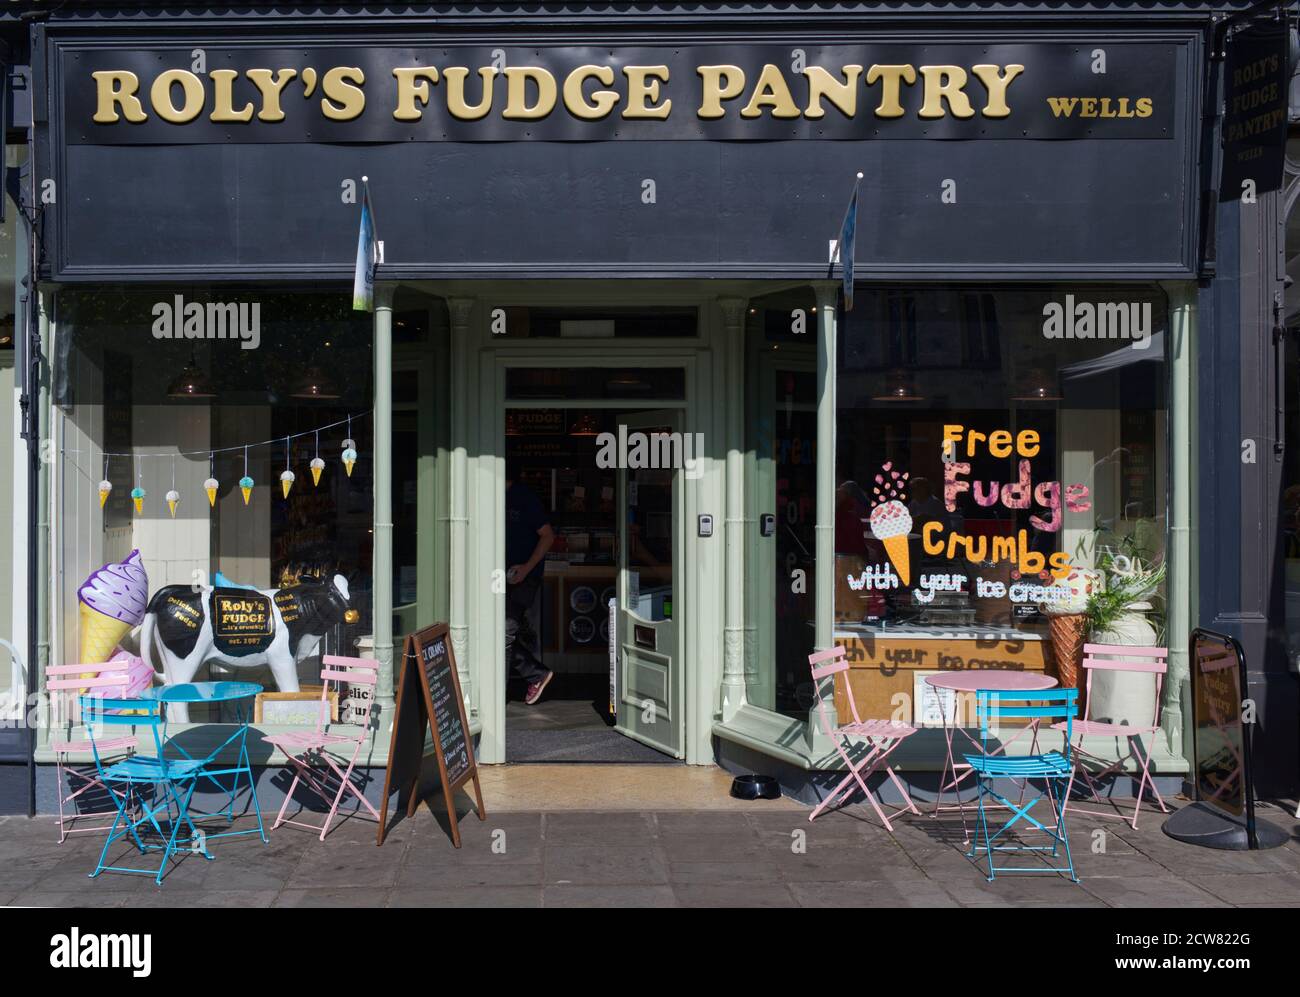 Roly's Fudge Pantry am Wells Market Square Stockfoto